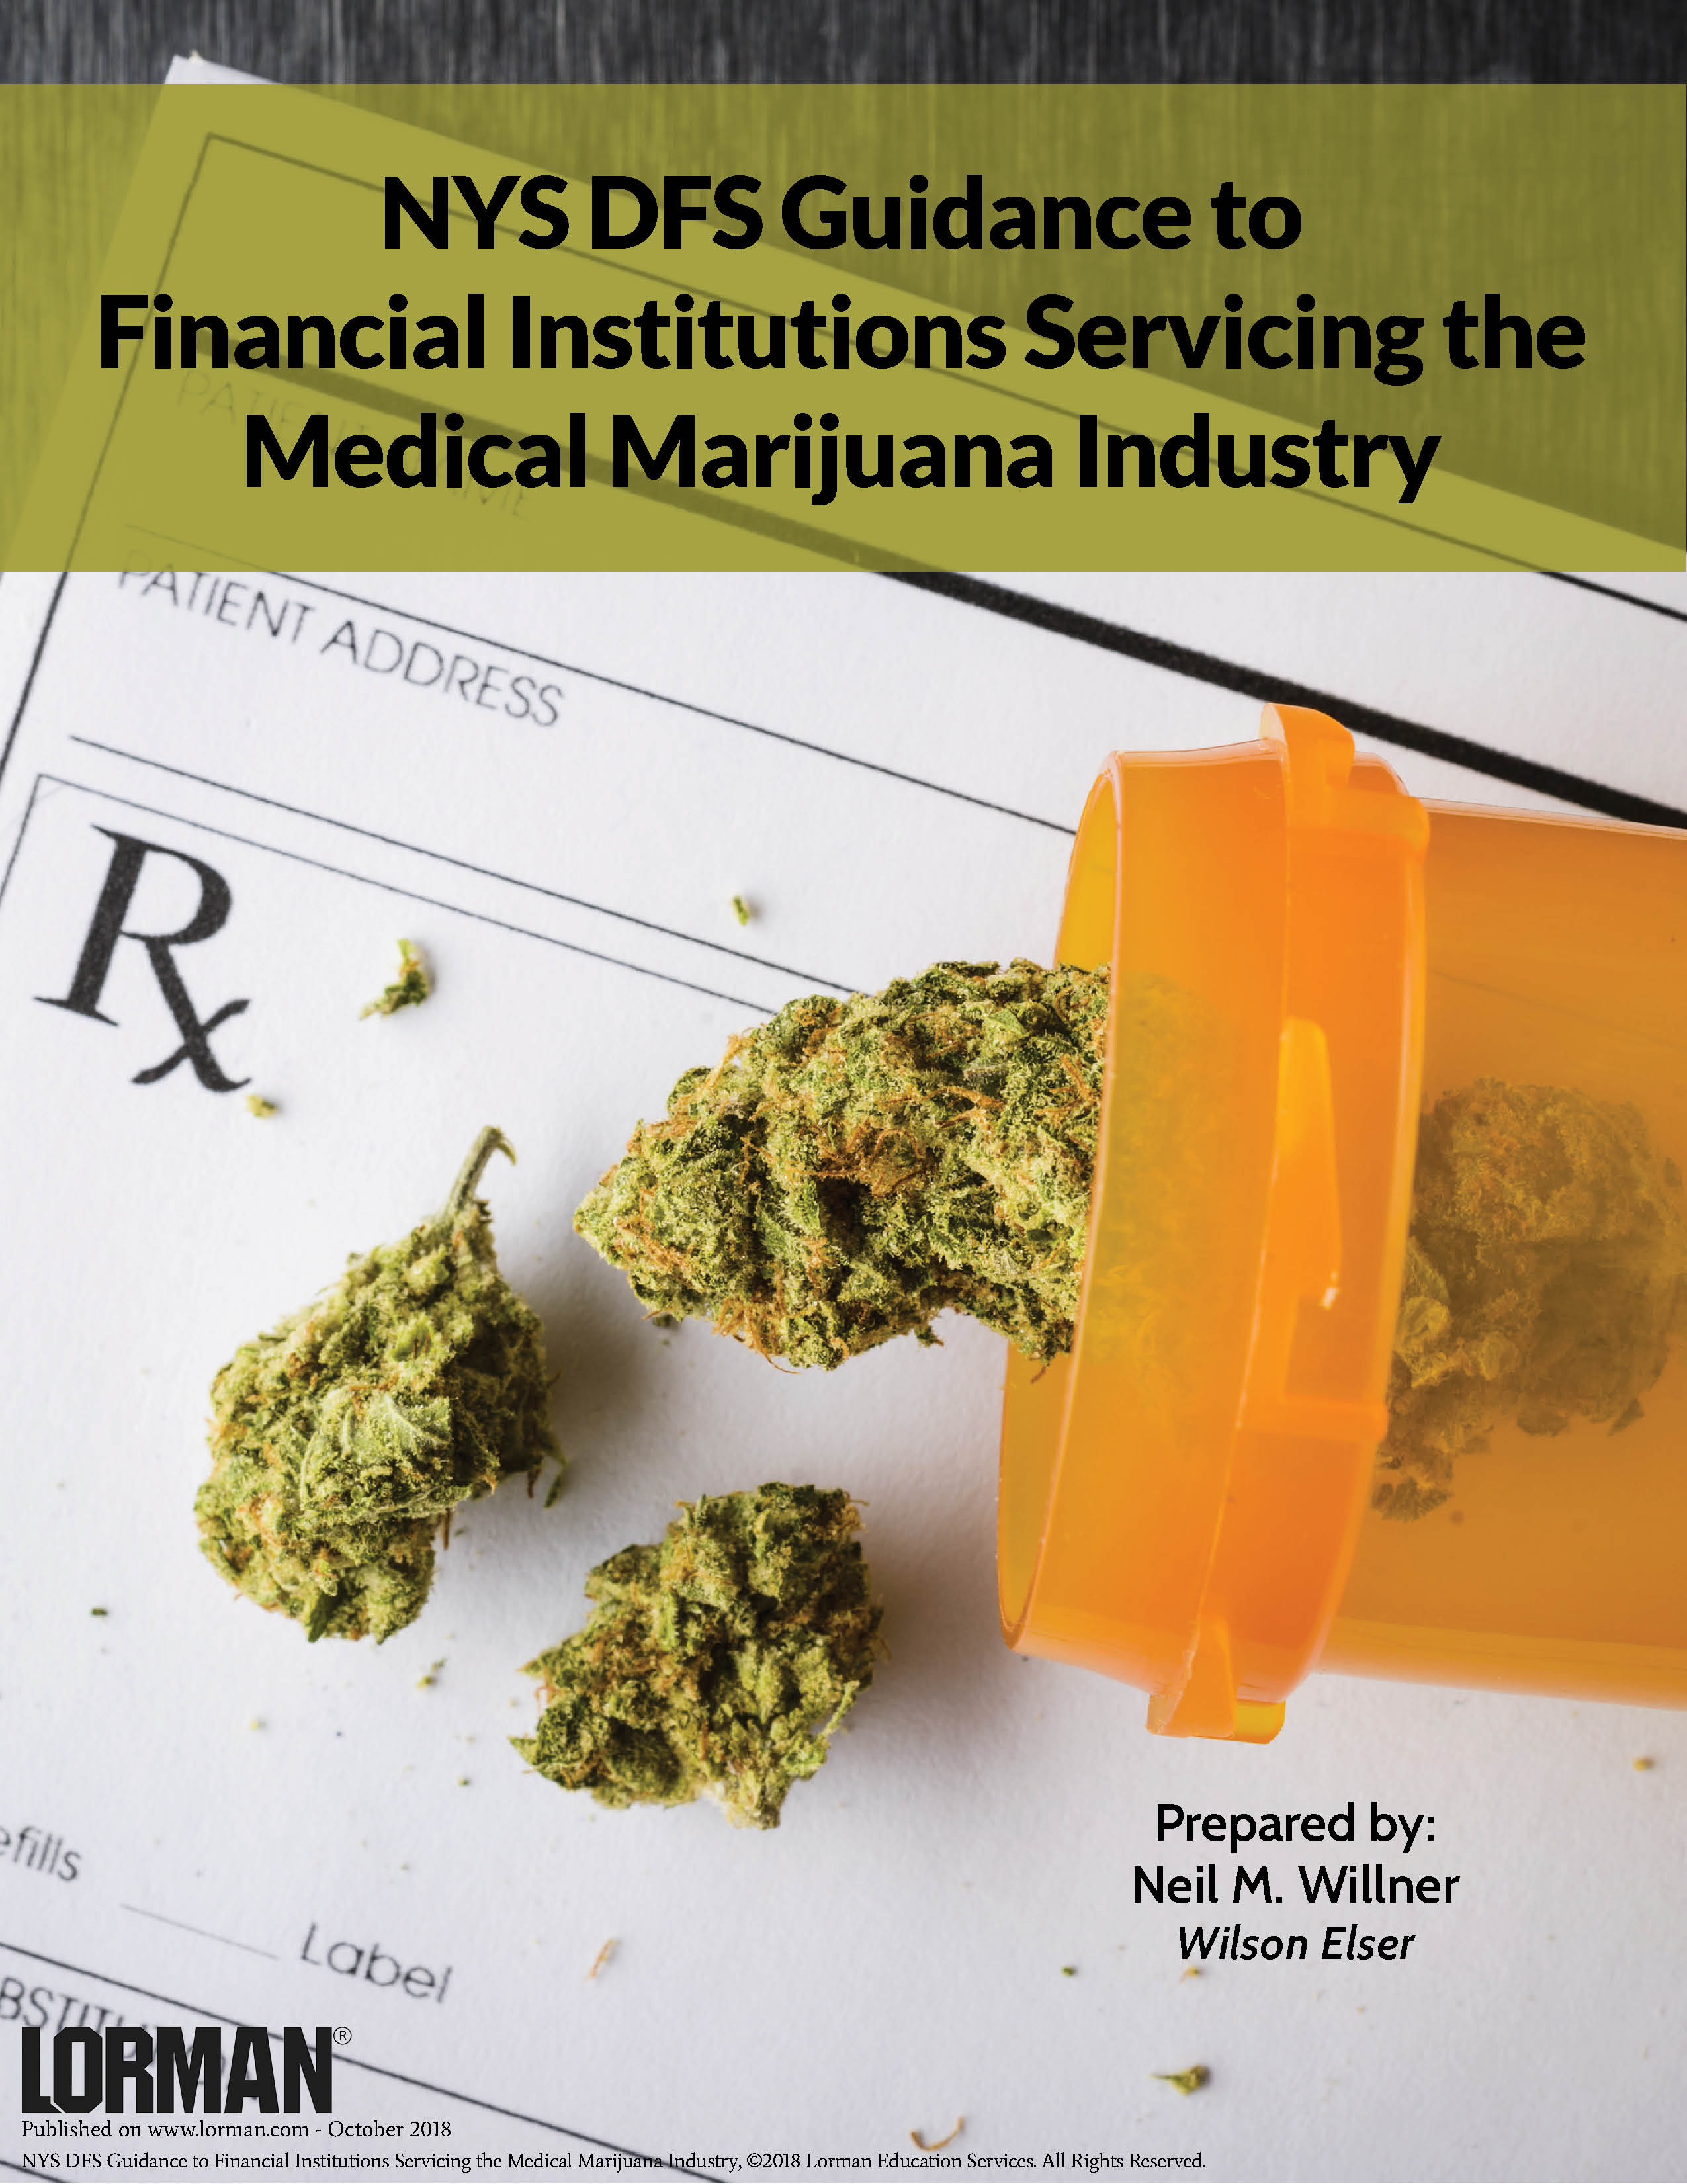 NYS DFS Guidance to Financial Institutions Servicing the Medical Marijuana Industry